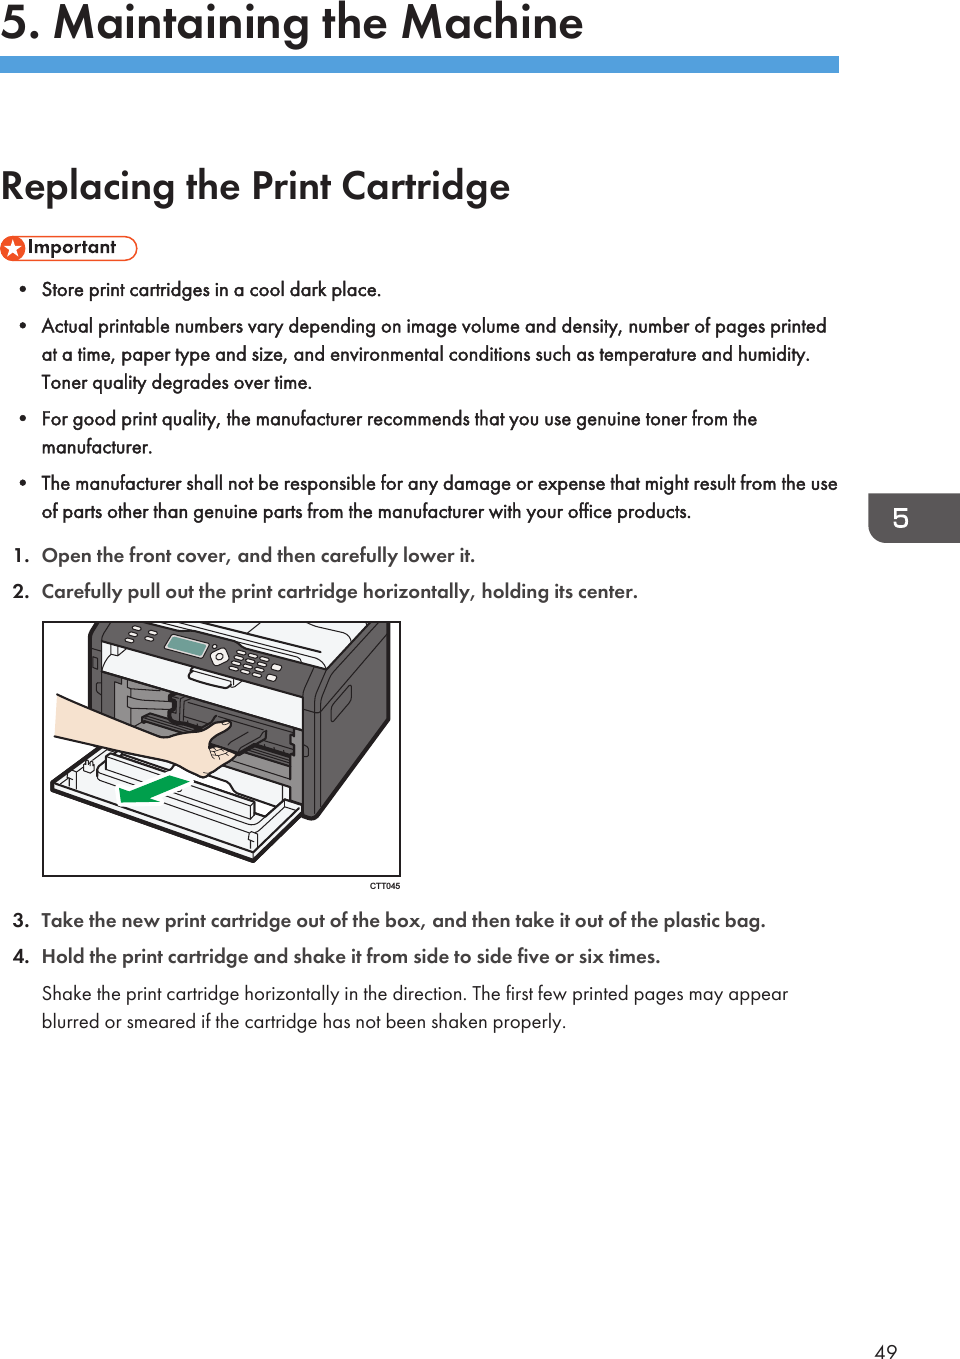 5. Maintaining the MachineReplacing the Print Cartridge• Store print cartridges in a cool dark place.• Actual printable numbers vary depending on image volume and density, number of pages printedat a time, paper type and size, and environmental conditions such as temperature and humidity.Toner quality degrades over time.• For good print quality, the manufacturer recommends that you use genuine toner from themanufacturer.• The manufacturer shall not be responsible for any damage or expense that might result from the useof parts other than genuine parts from the manufacturer with your office products.1. Open the front cover, and then carefully lower it.2. Carefully pull out the print cartridge horizontally, holding its center.CTT0453. Take the new print cartridge out of the box, and then take it out of the plastic bag.4. Hold the print cartridge and shake it from side to side five or six times.Shake the print cartridge horizontally in the direction. The first few printed pages may appearblurred or smeared if the cartridge has not been shaken properly.49